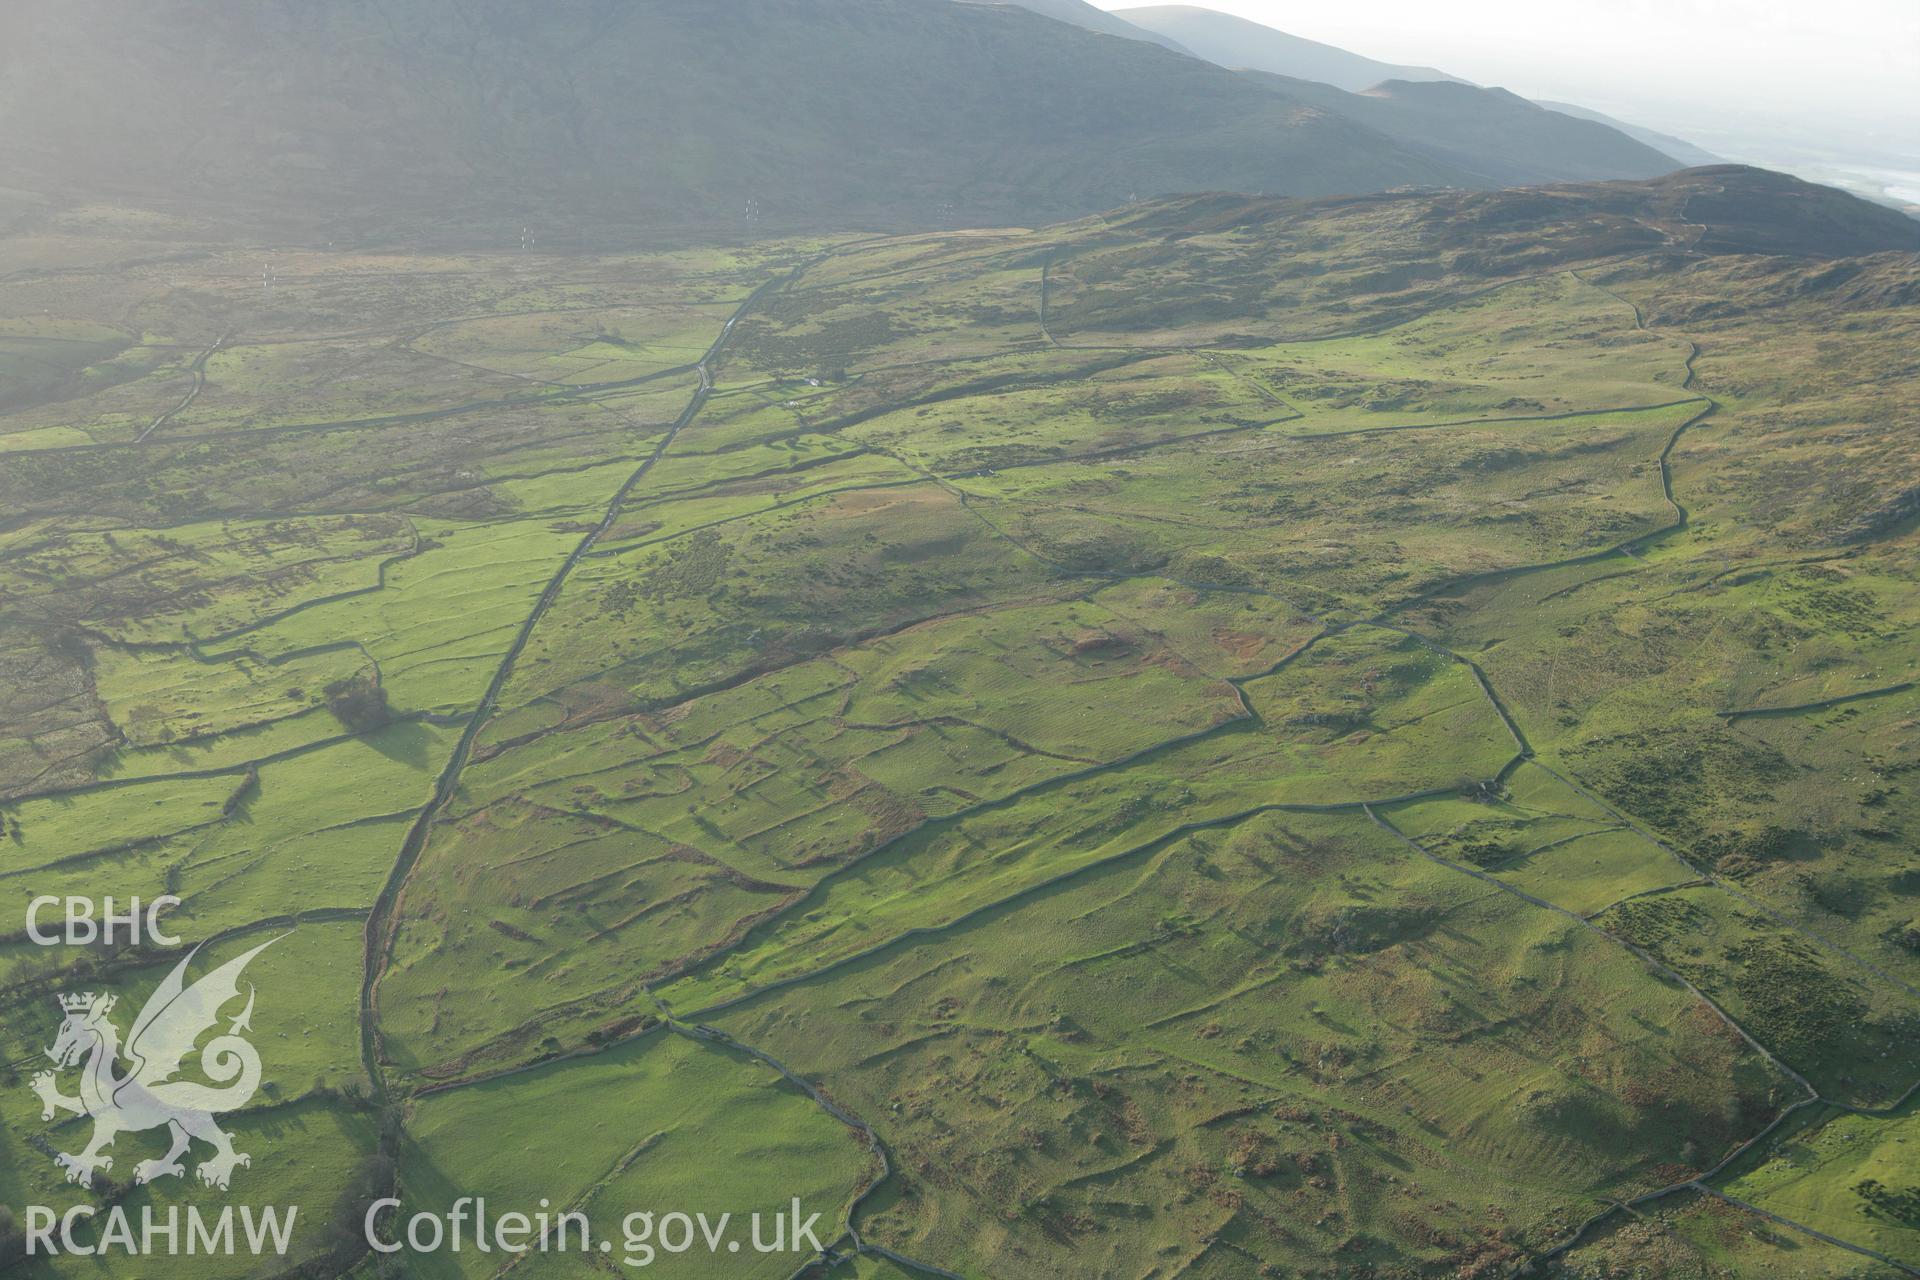 RCAHMW colour oblique aerial photograph of Maen-y-Bardd Settlement and field systems. Taken on 10 December 2009 by Toby Driver